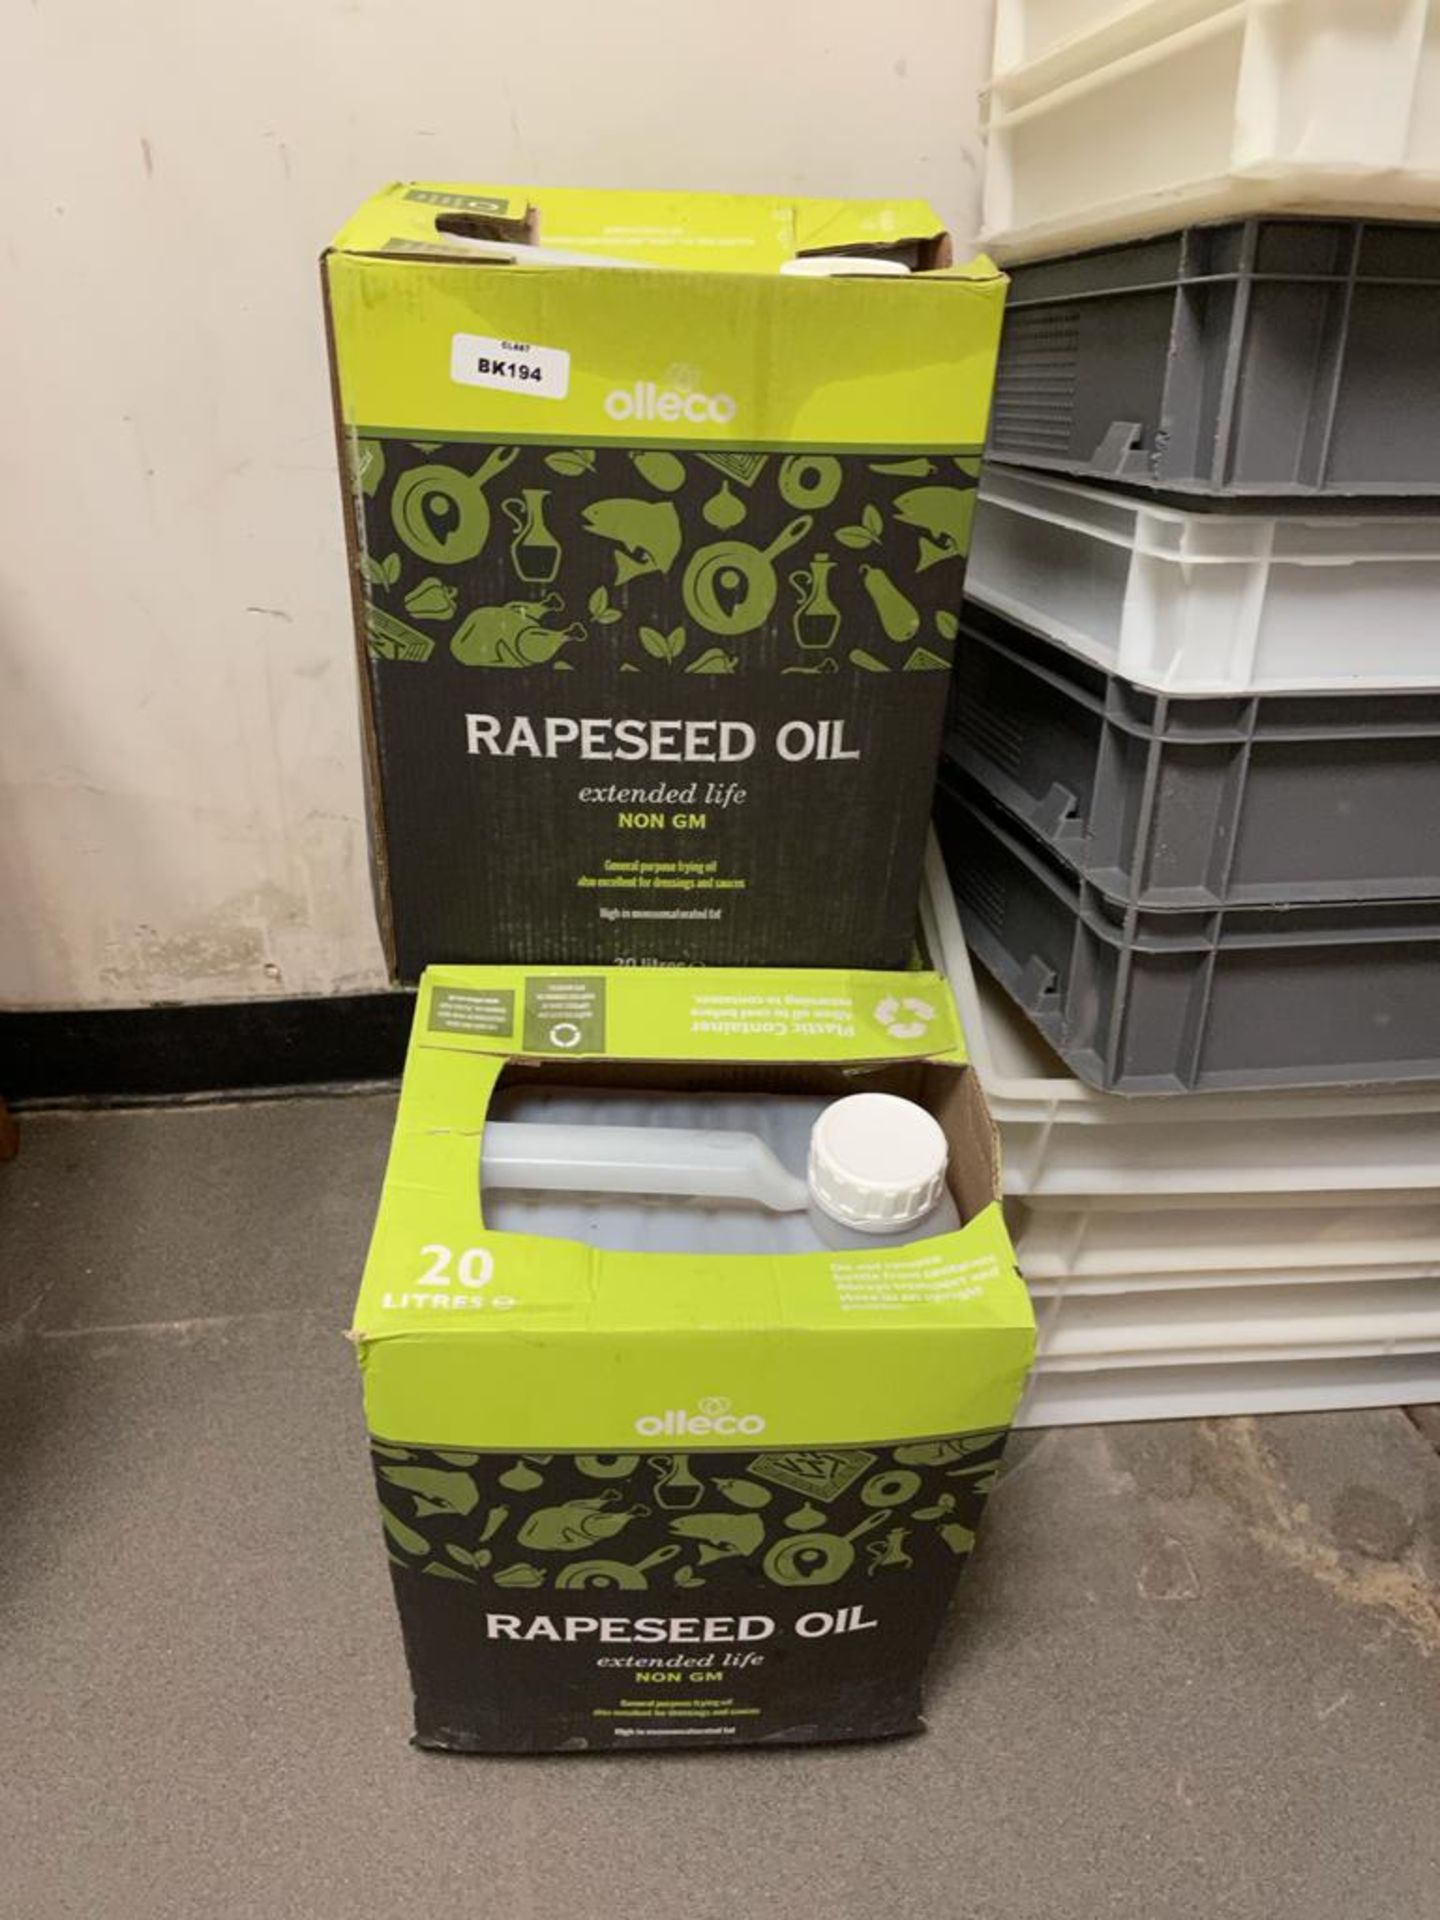 3 x 20 Litre Tubs of Olleco Rapeseed Oil - Unused Boxed Stock - Ref: BK194 - CL686 - Location: - Image 3 of 4